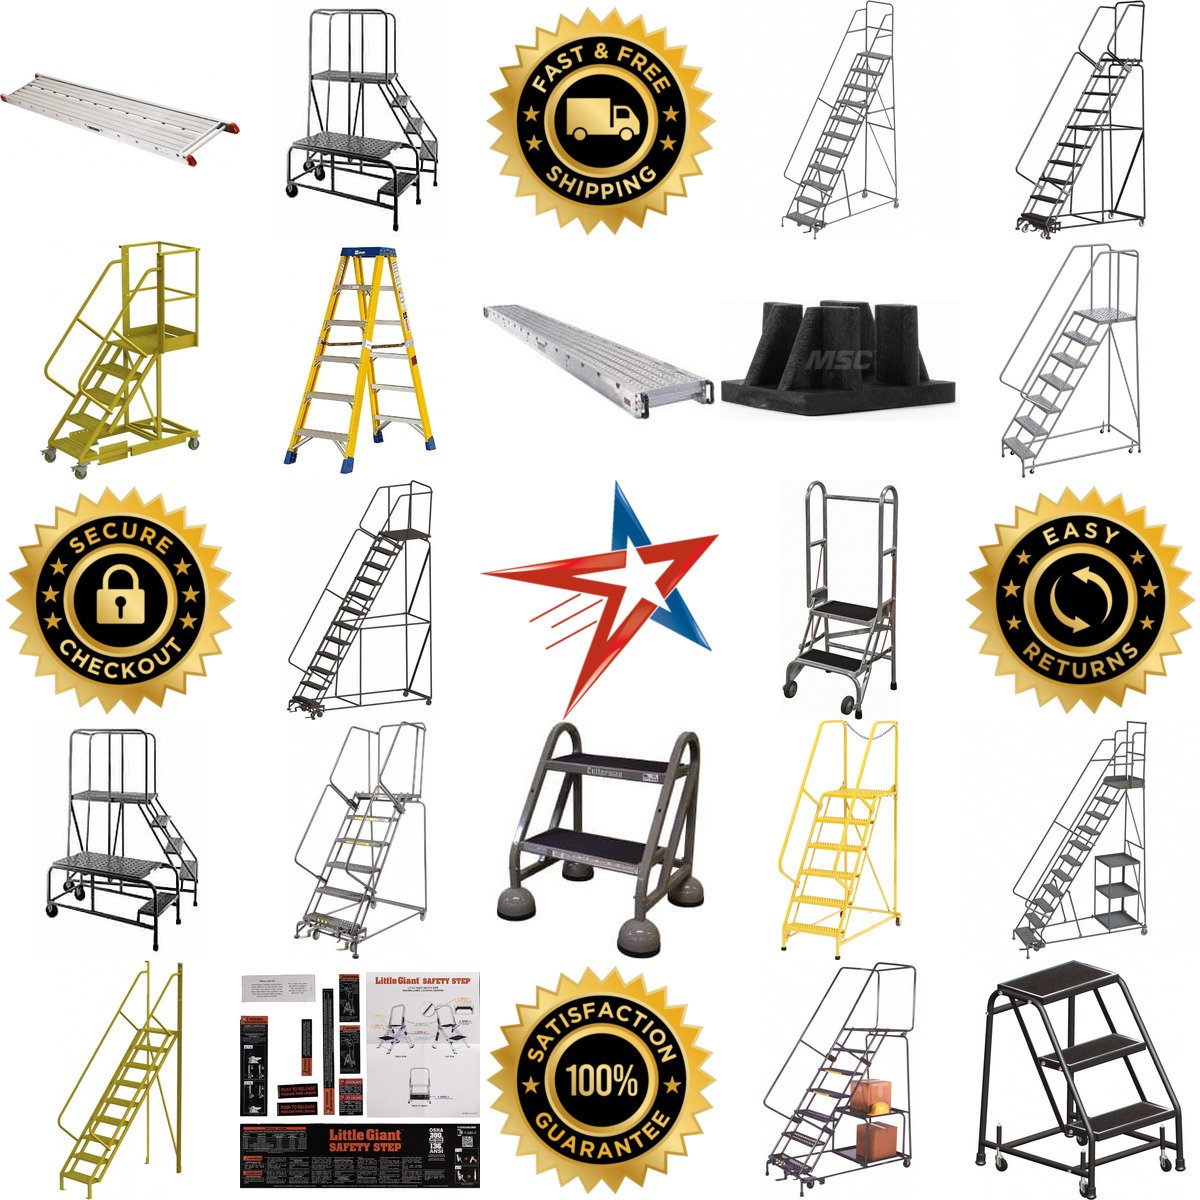 A selection of Ladders and Scaffolding products on GoVets